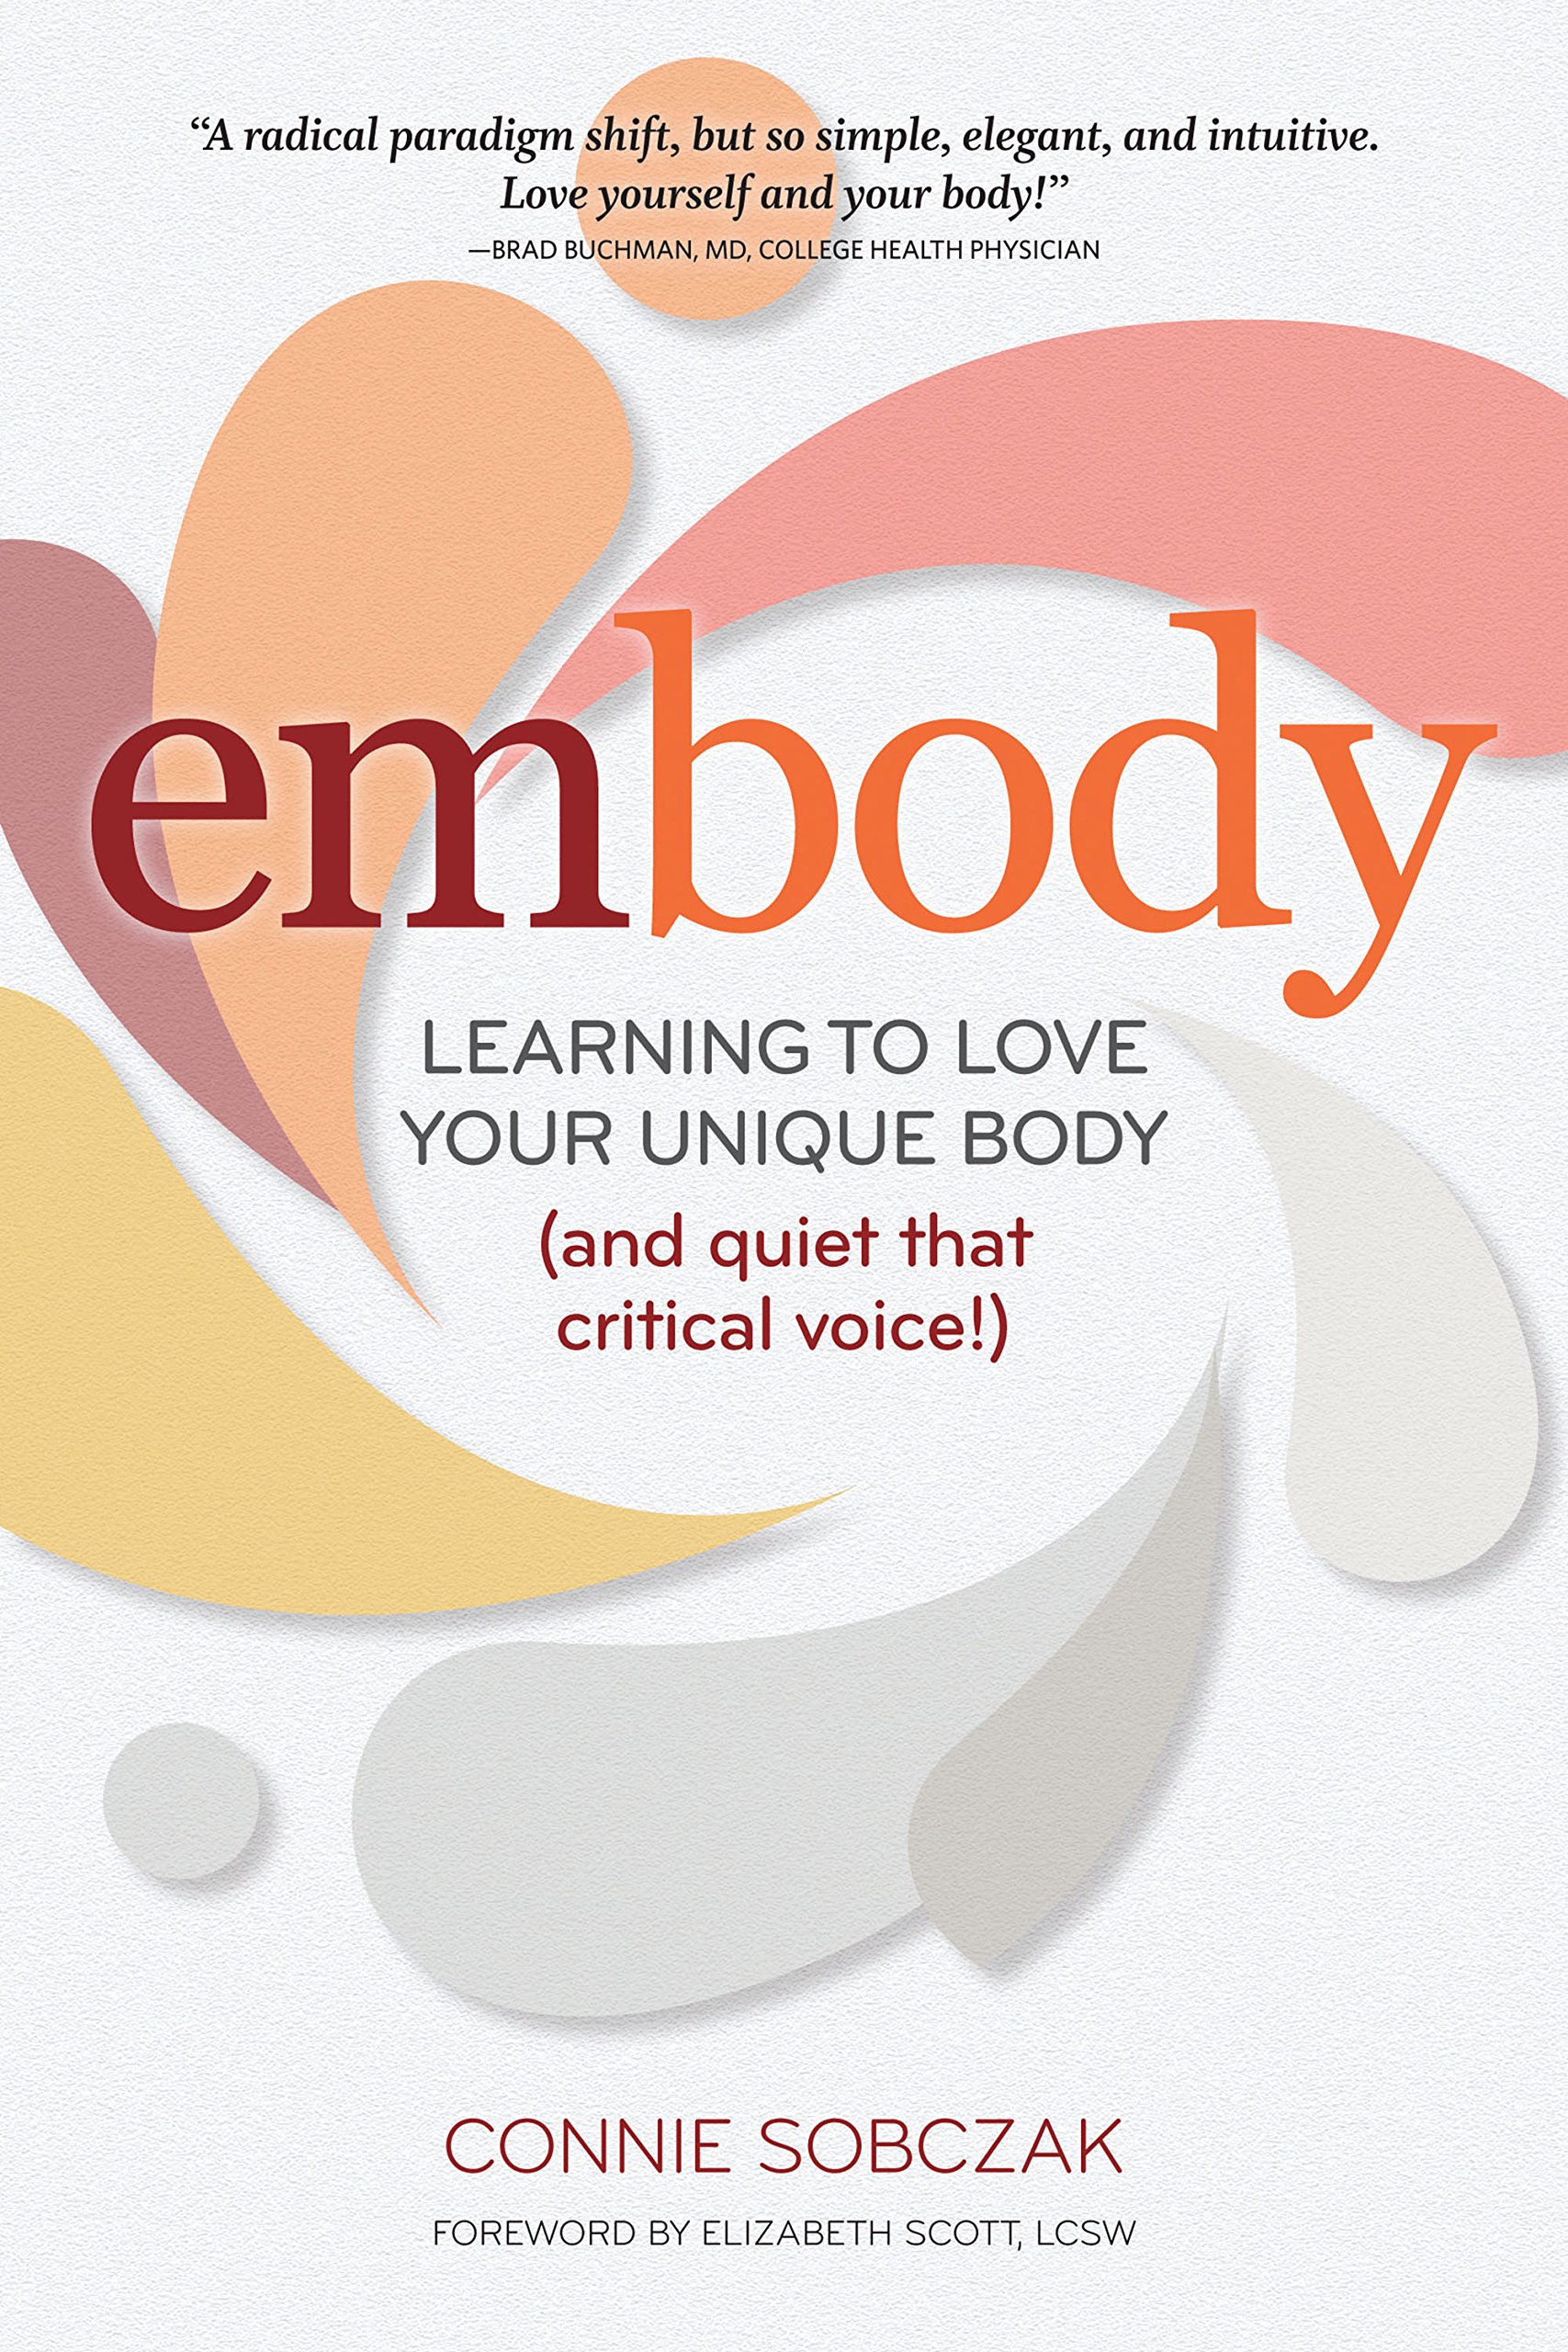 embody-Learning to Love Your Unique Body-CLASSIBLOGGER